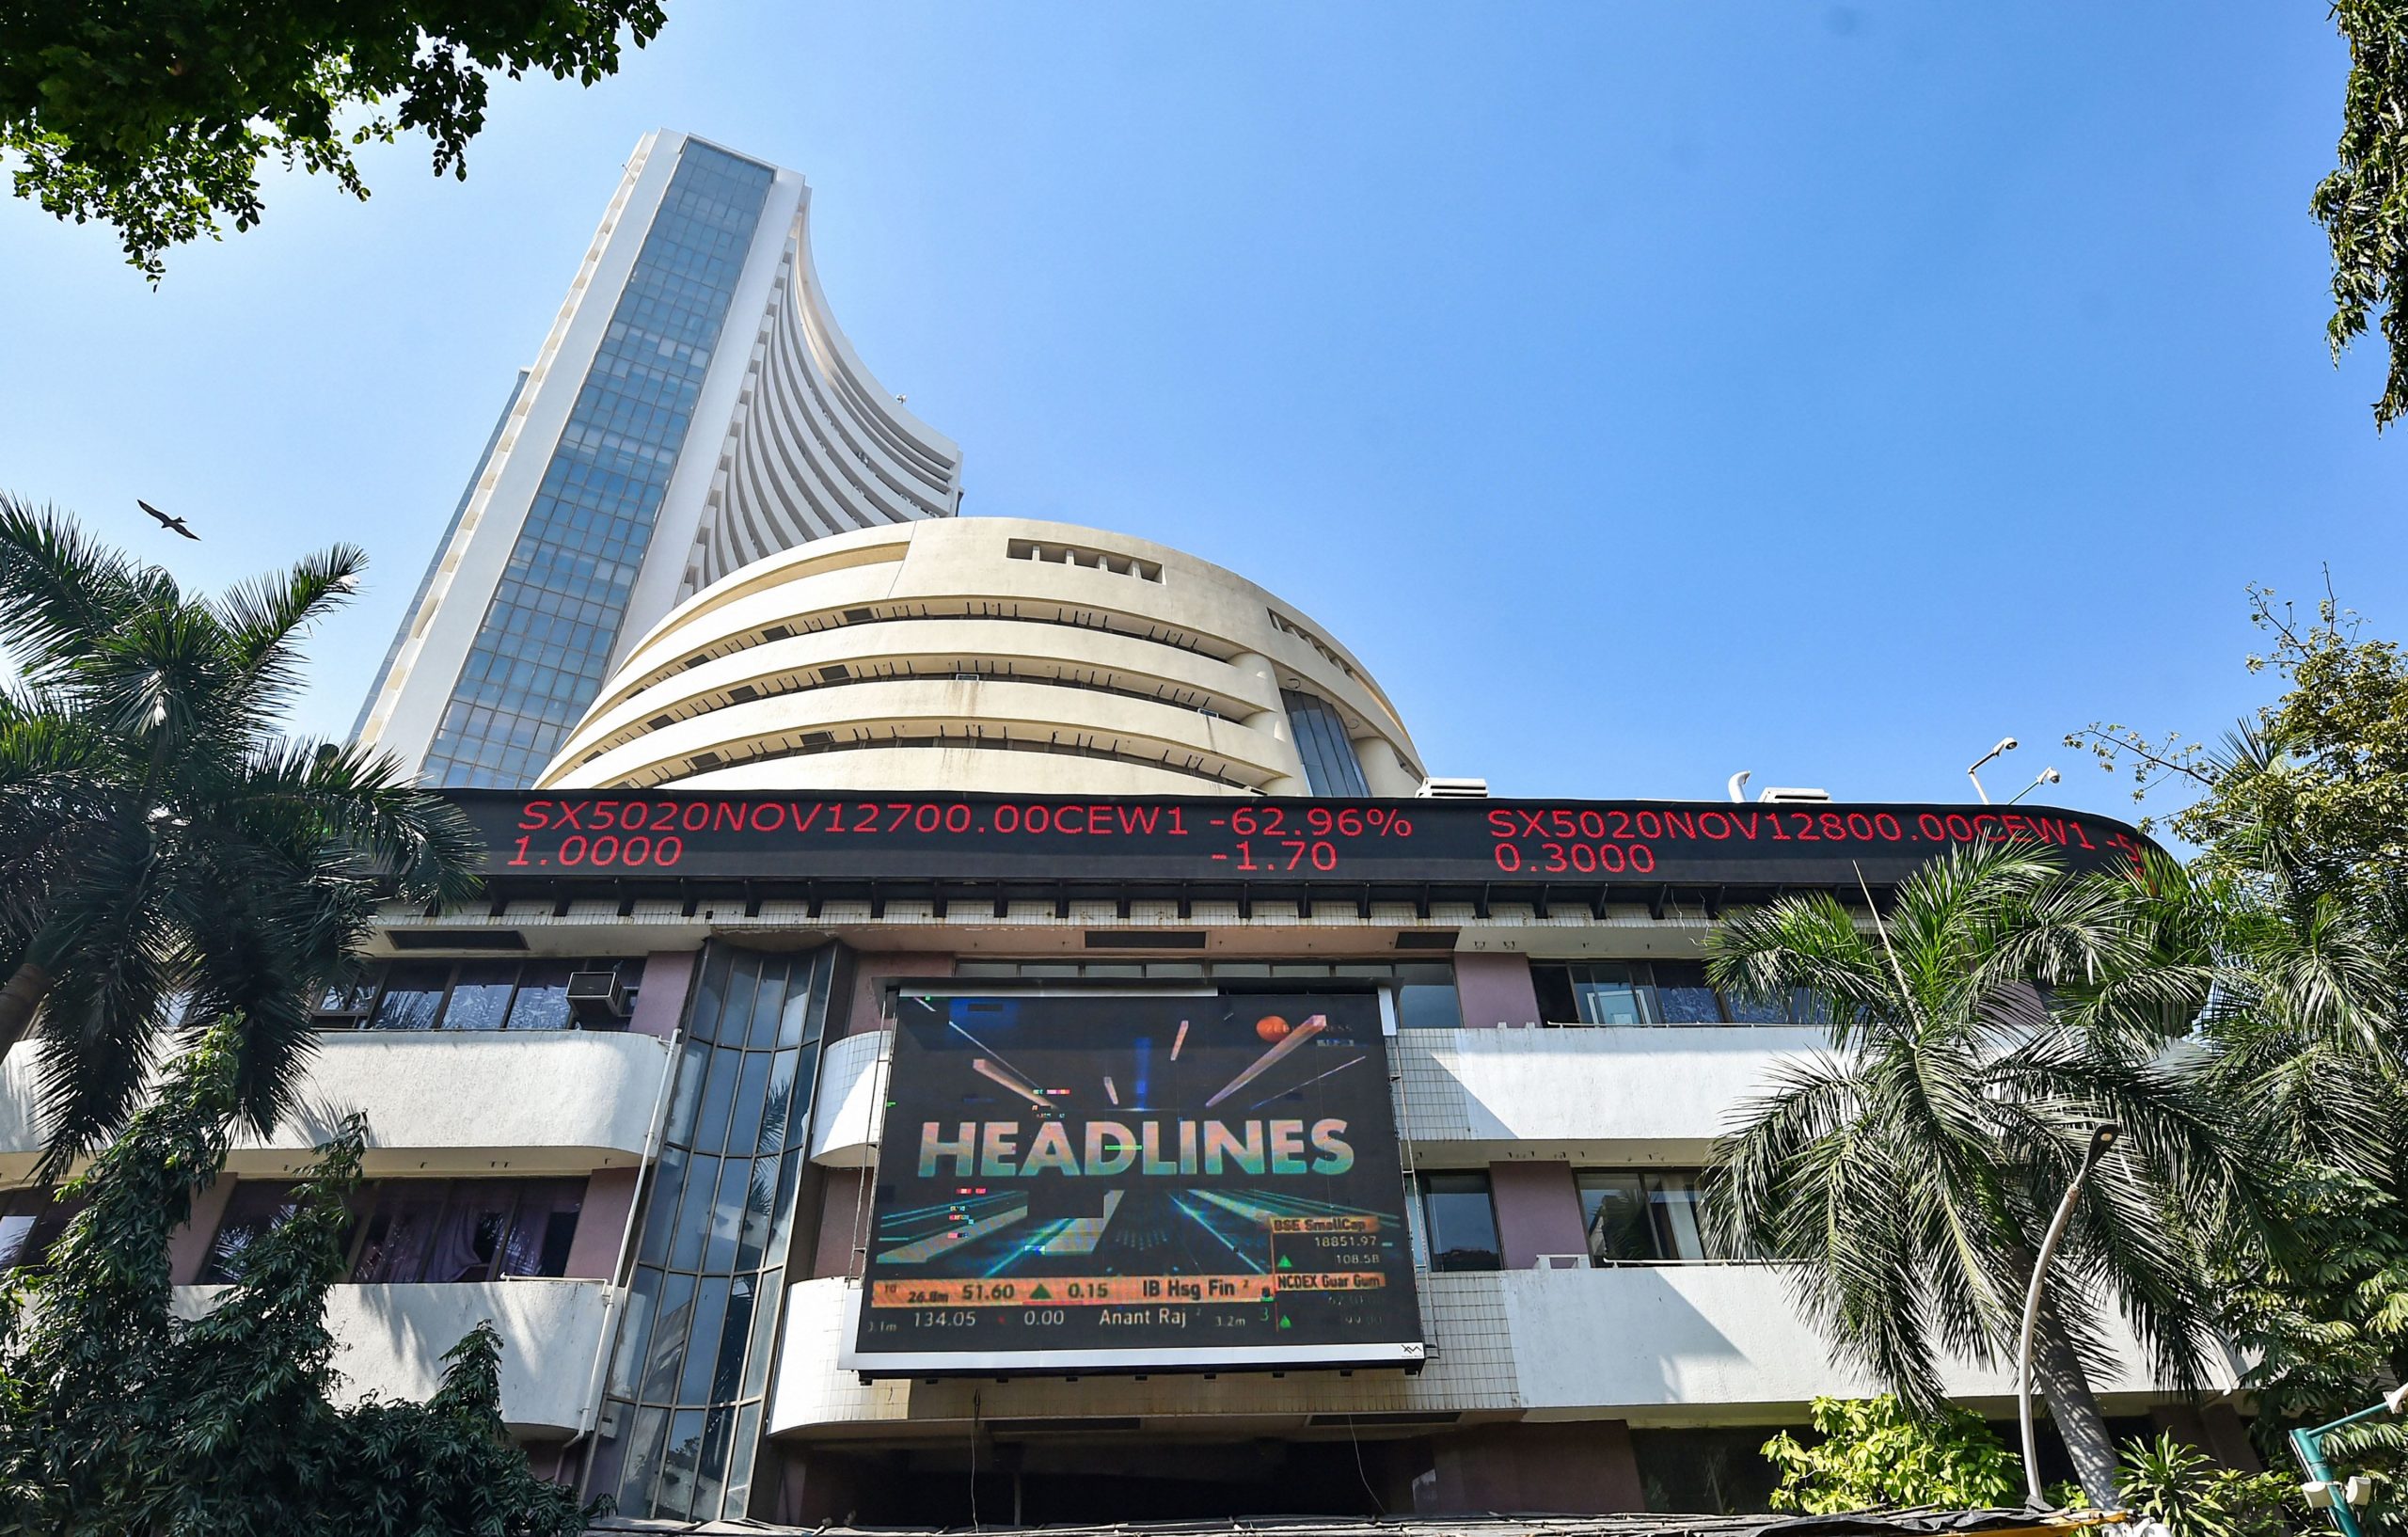 Trending Stocks: Vodafone Idea, Eveready, PTC, SJVN and others in news today